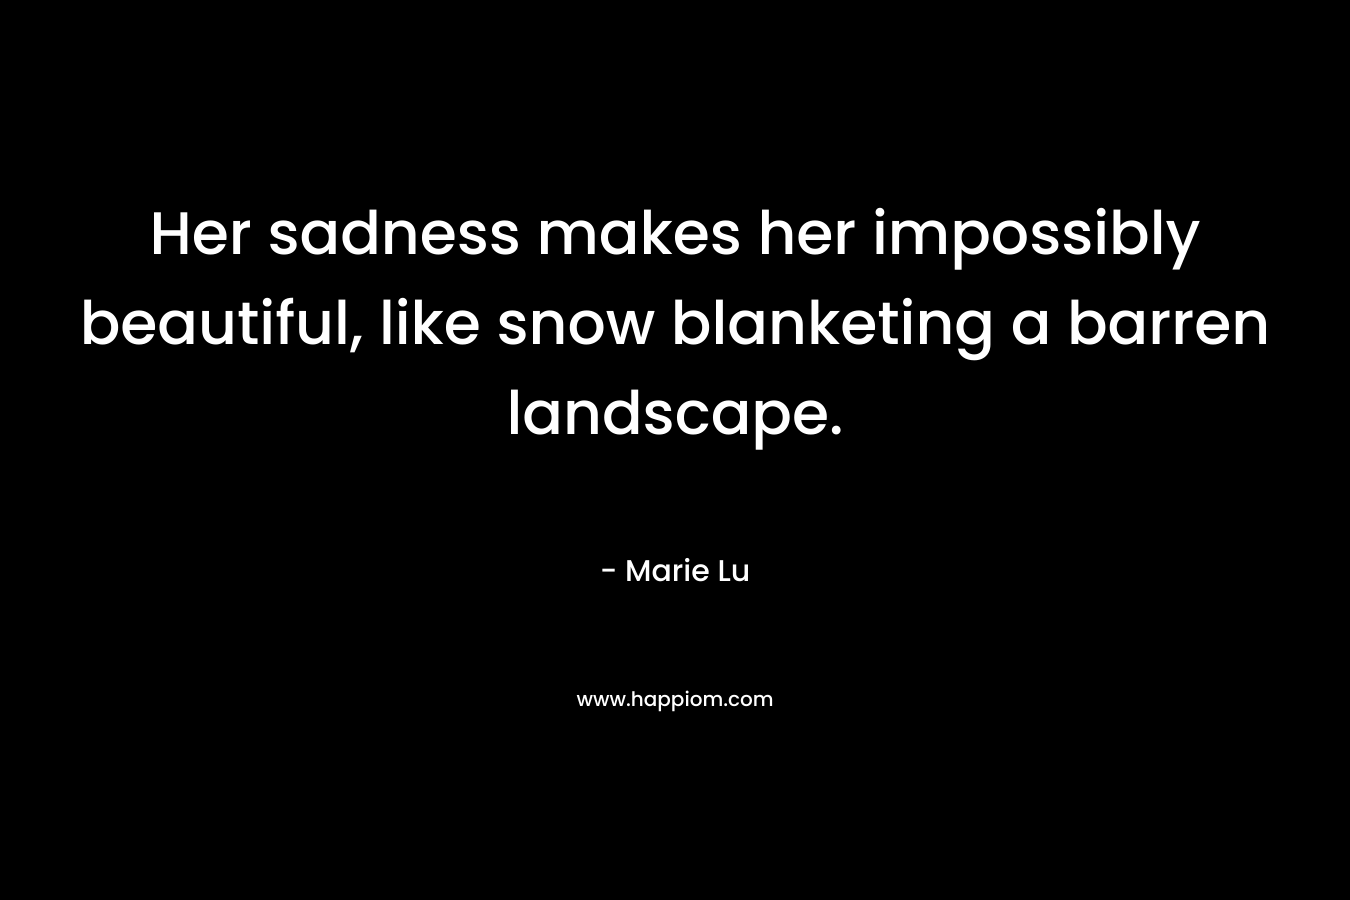 Her sadness makes her impossibly beautiful, like snow blanketing a barren landscape.